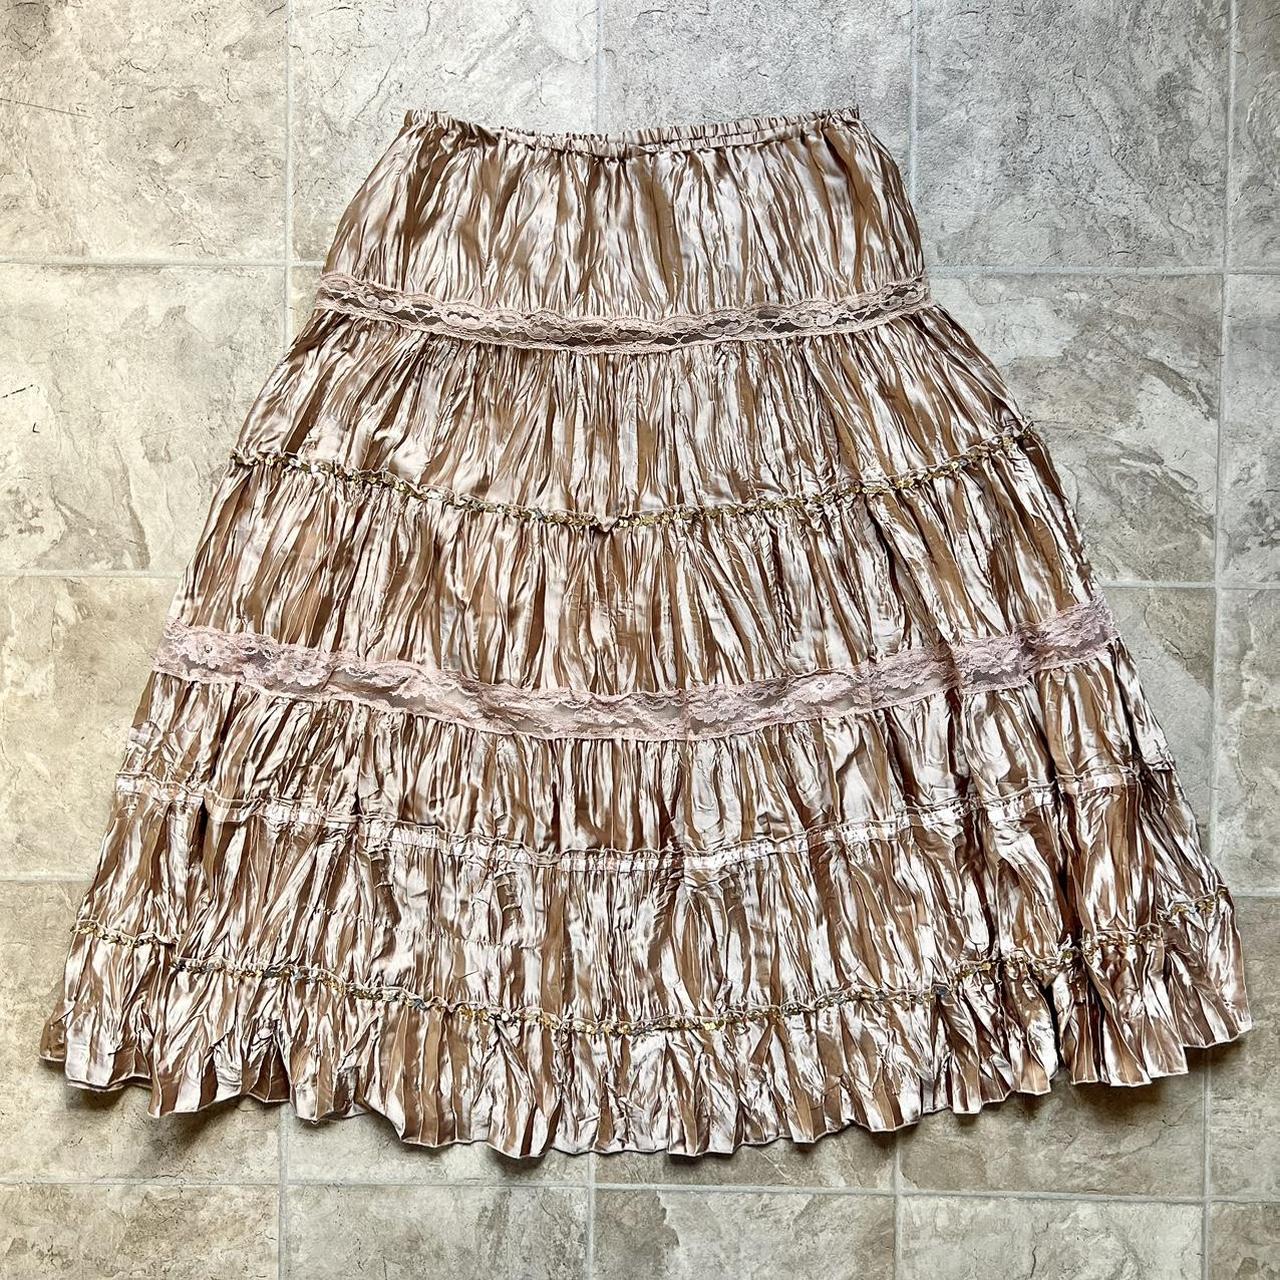 Vintage Fairycore Gold Tiered Maxi Skirt with Lace... - Depop